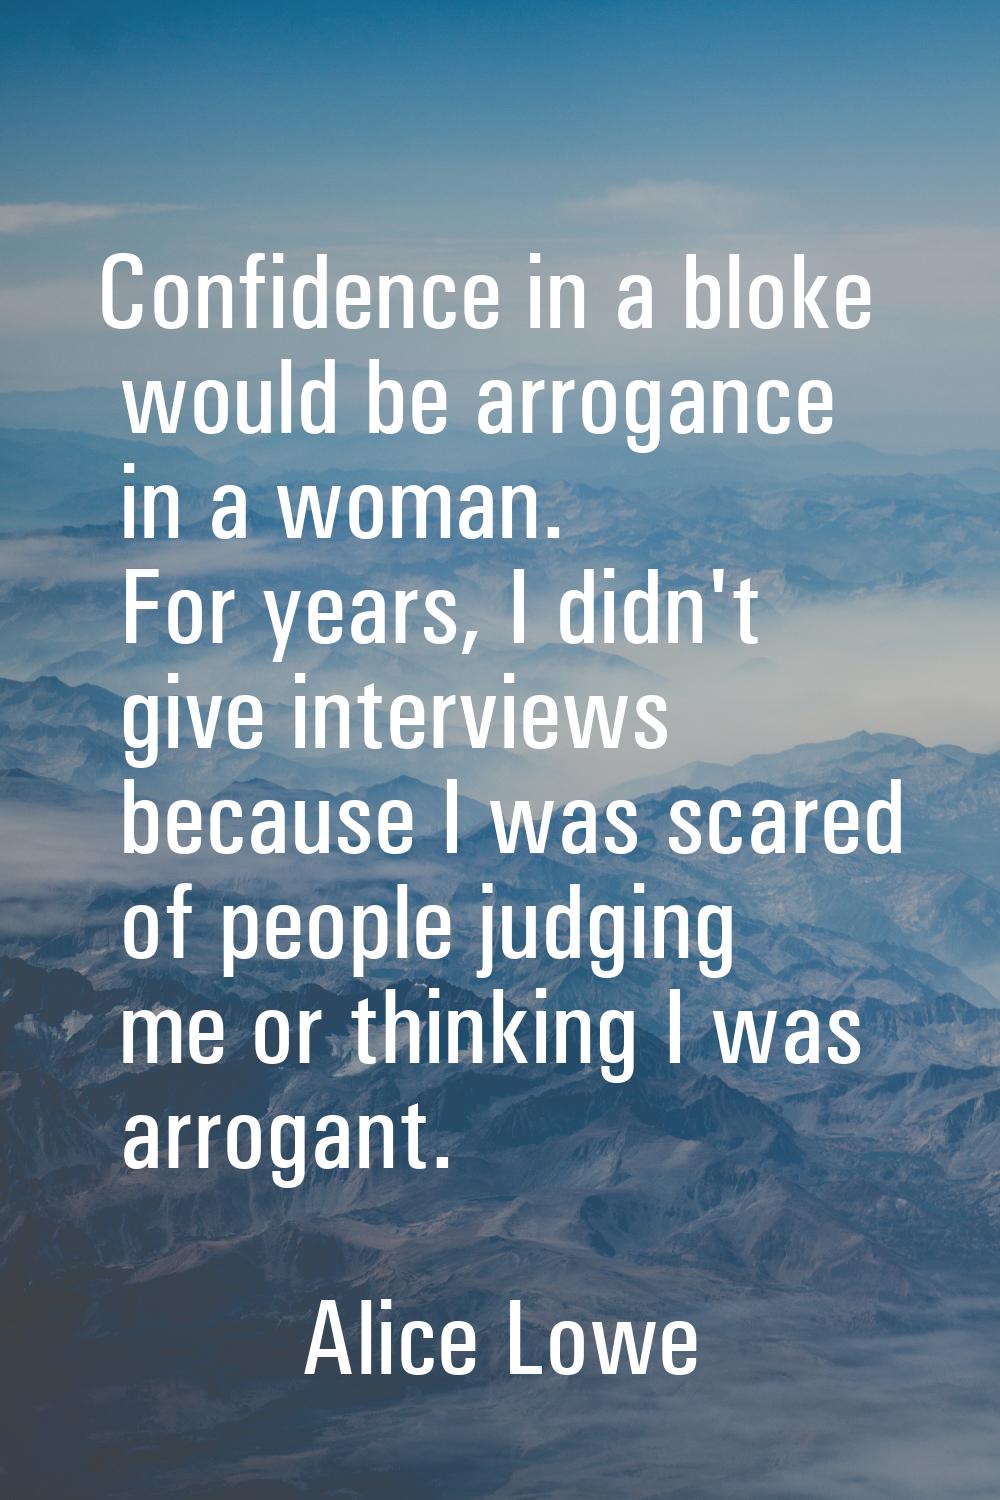 Confidence in a bloke would be arrogance in a woman. For years, I didn't give interviews because I 